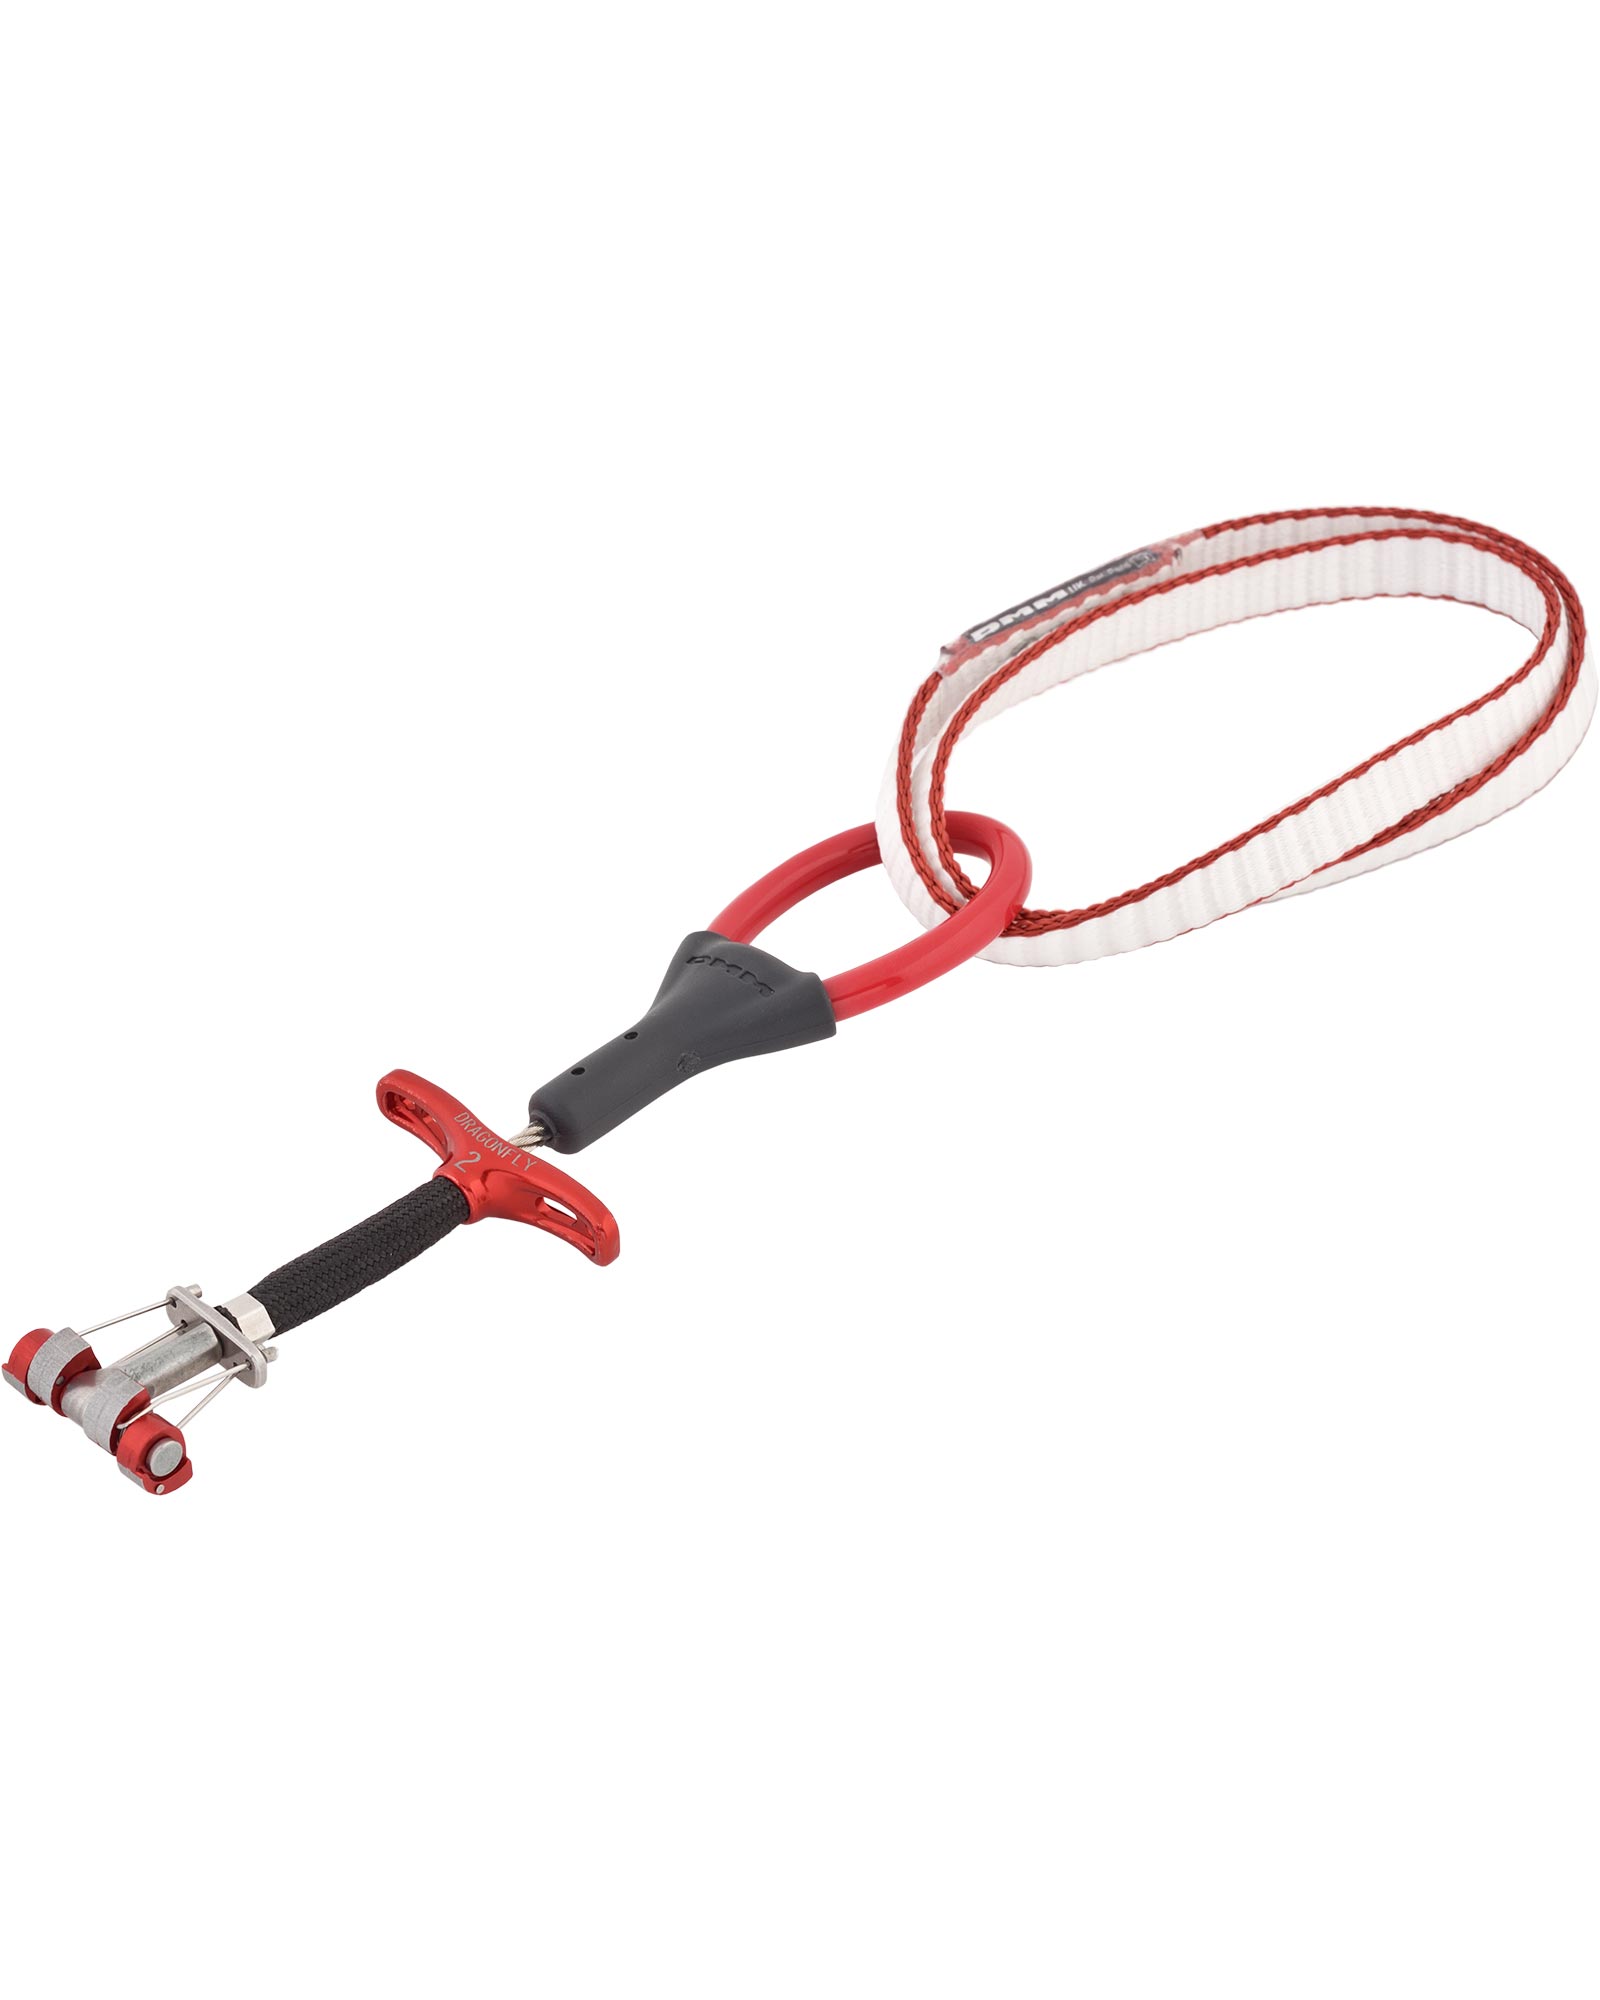 DMM Dragonfly Cam   2 - Red